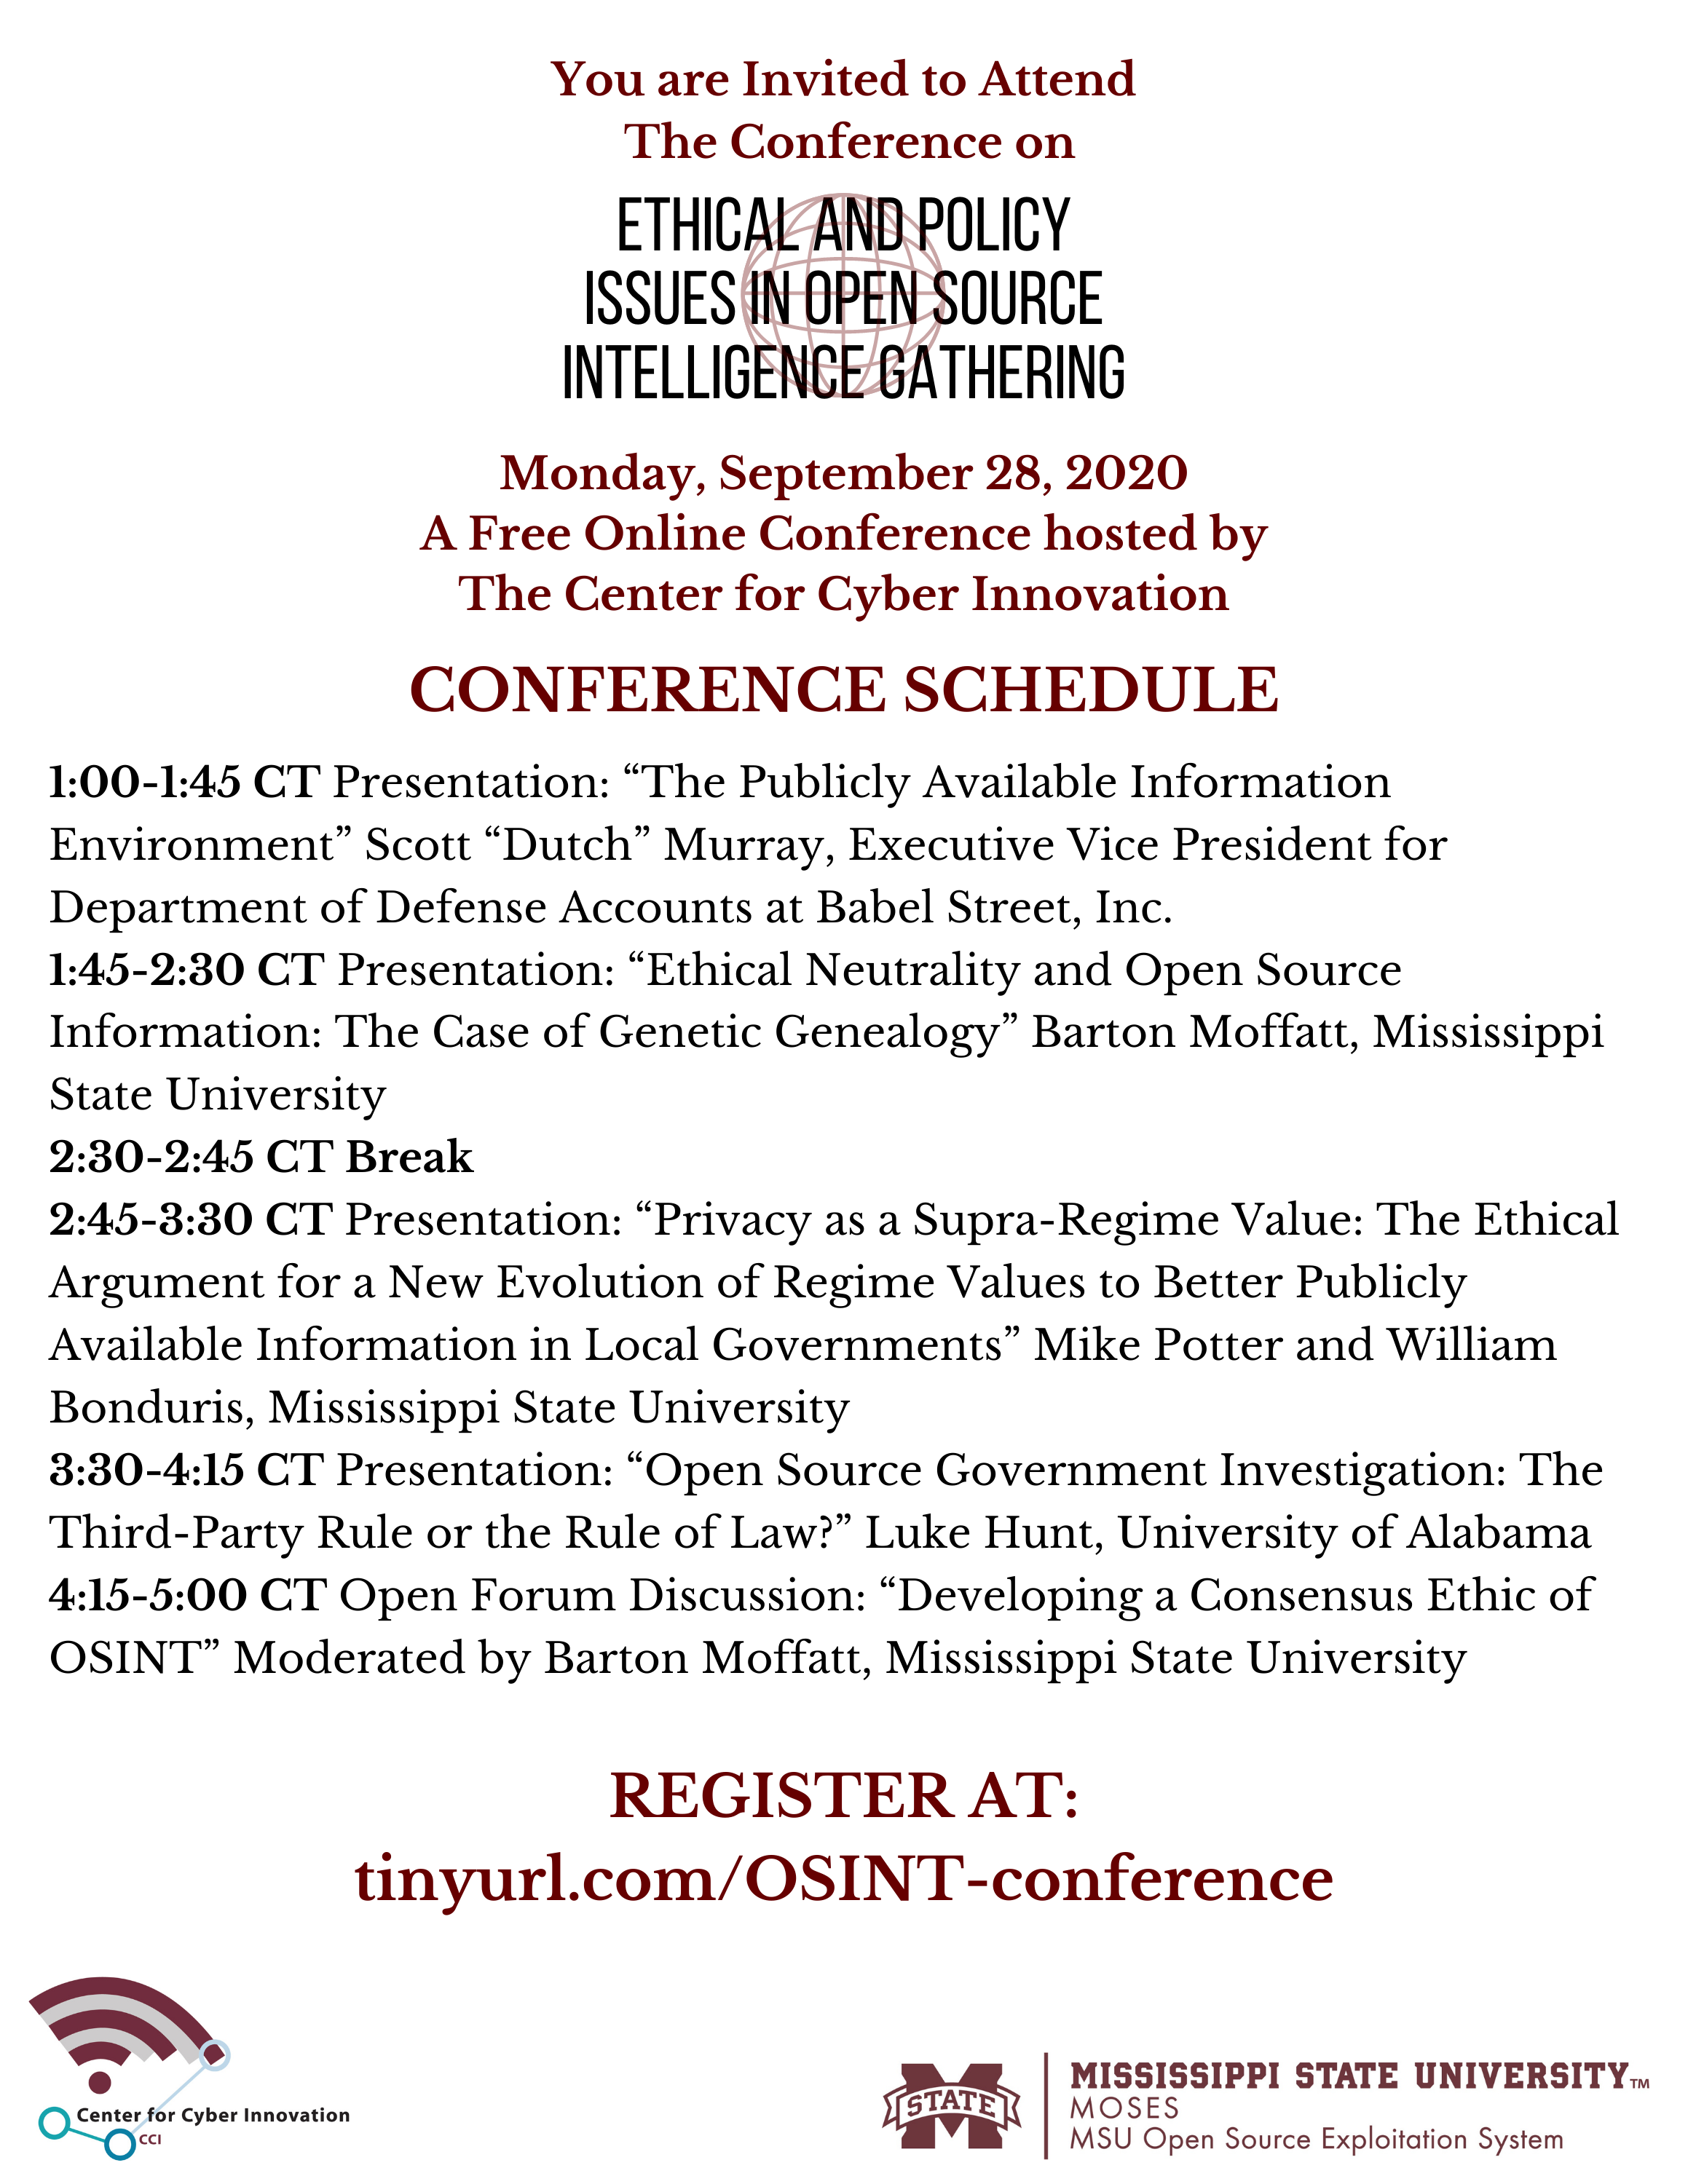 OSINT conference schedule